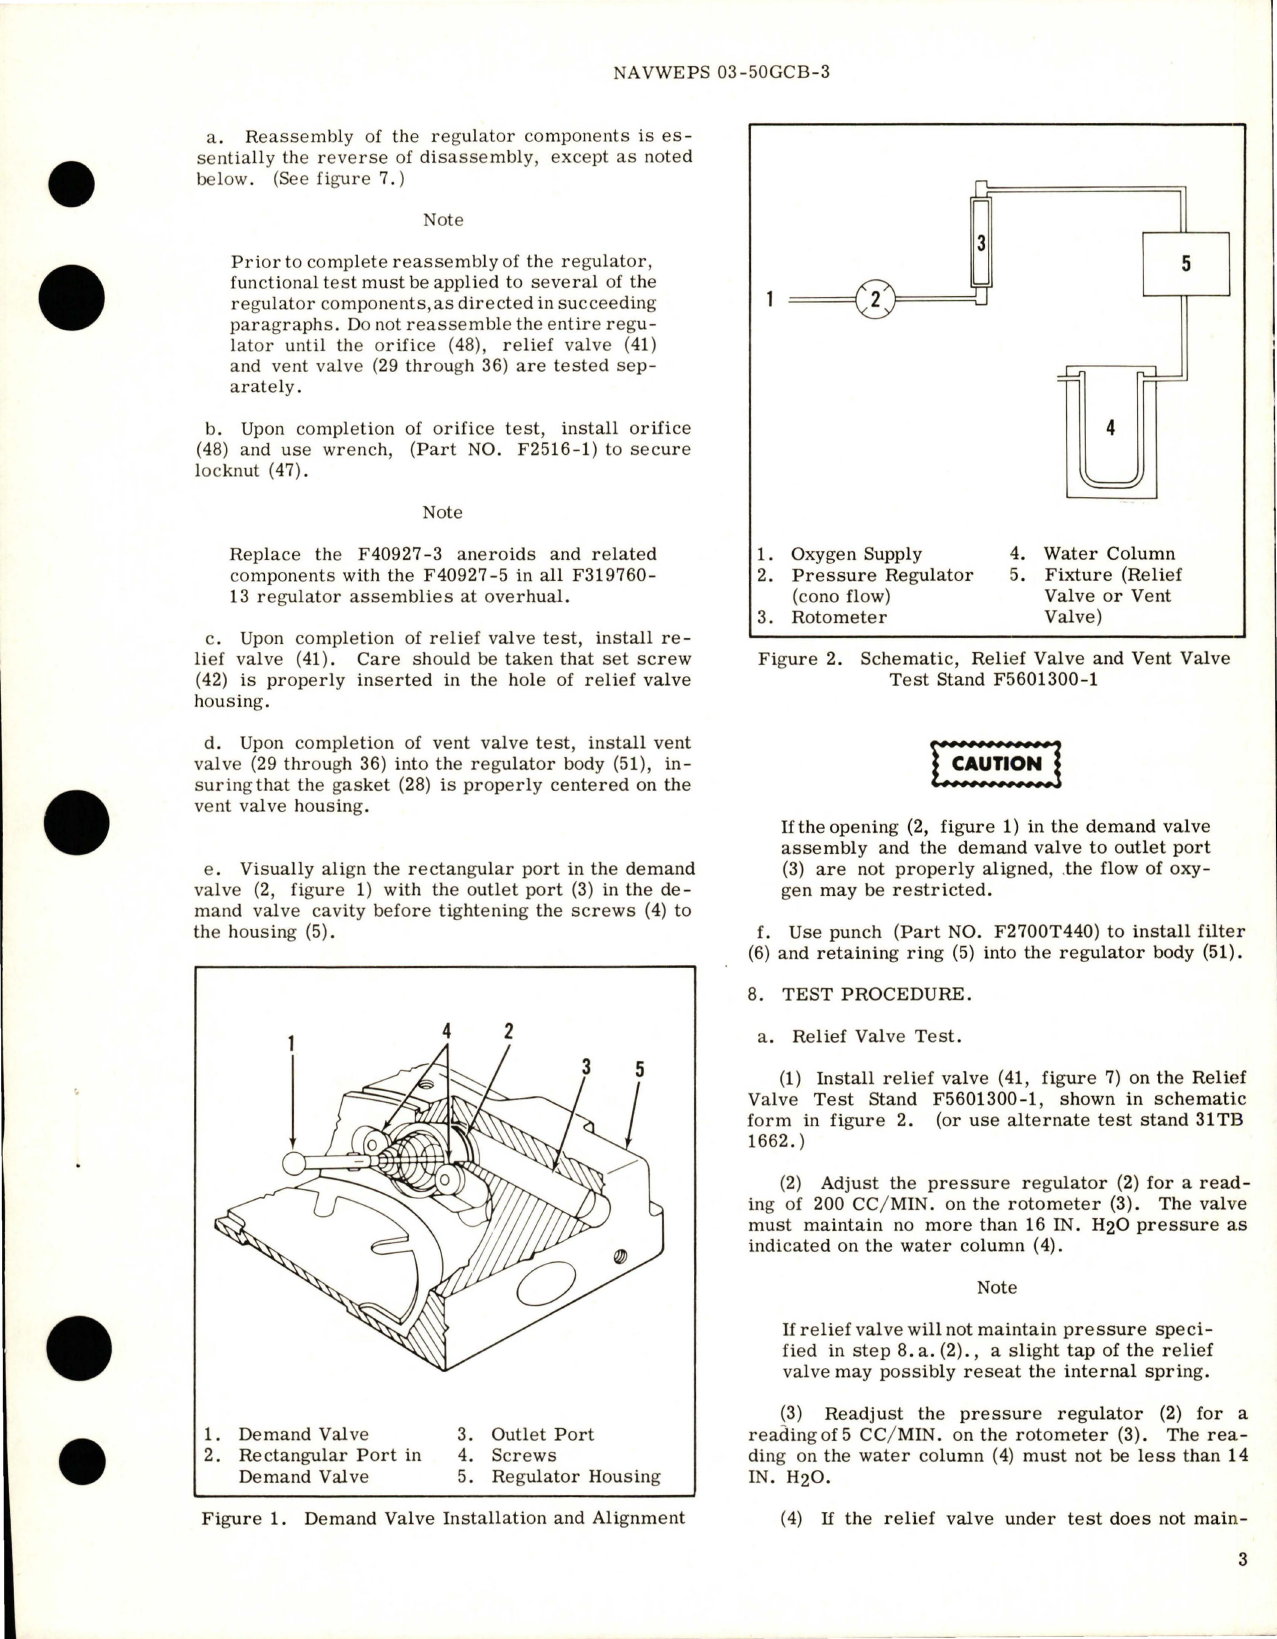 Sample page 5 from AirCorps Library document: Overhaul Instructions with Parts Breakdown for Ice Detector - Part 6506331 - Model AID-A9 